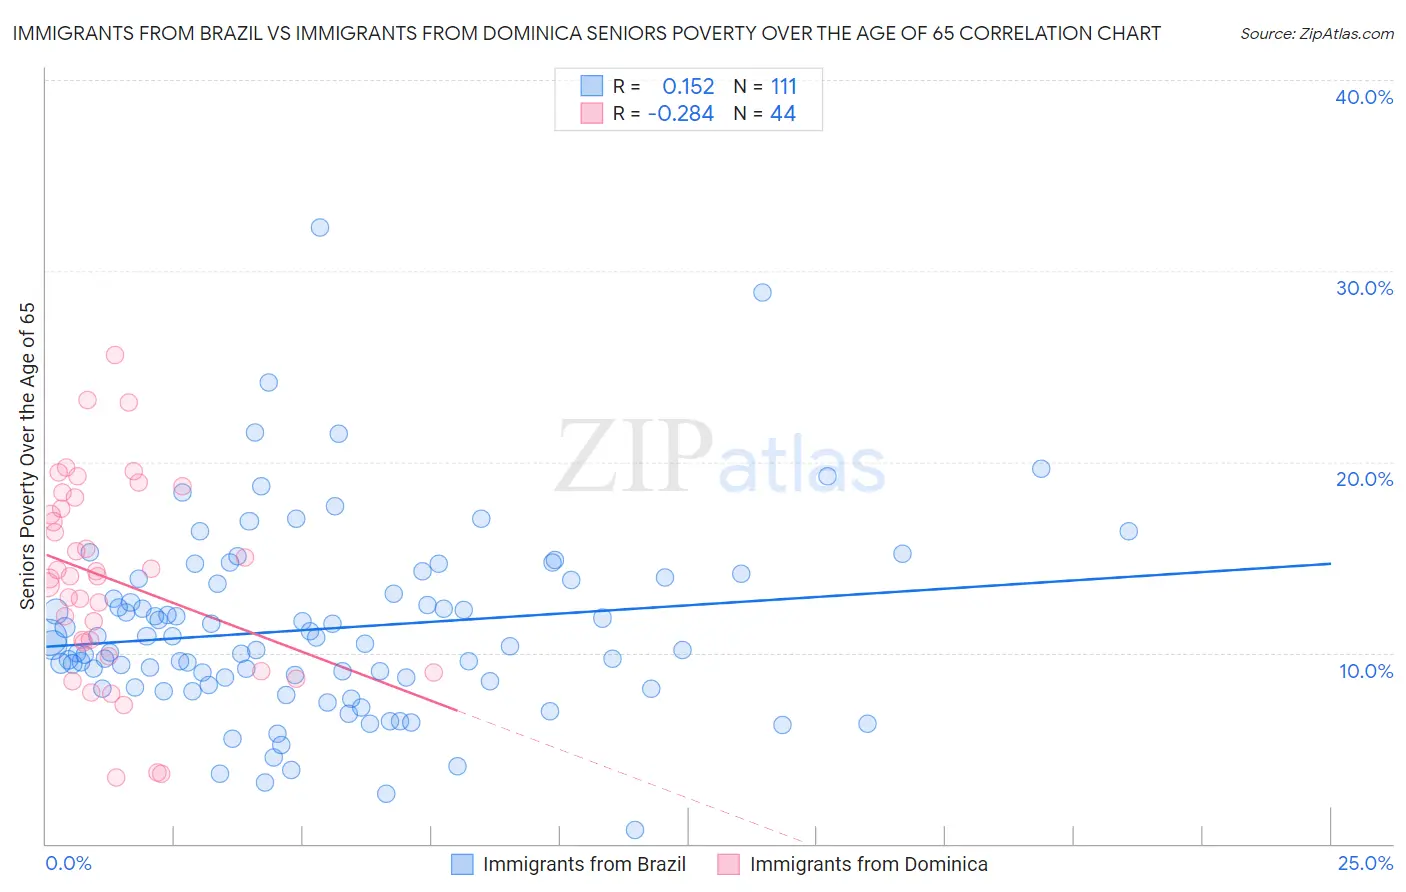 Immigrants from Brazil vs Immigrants from Dominica Seniors Poverty Over the Age of 65